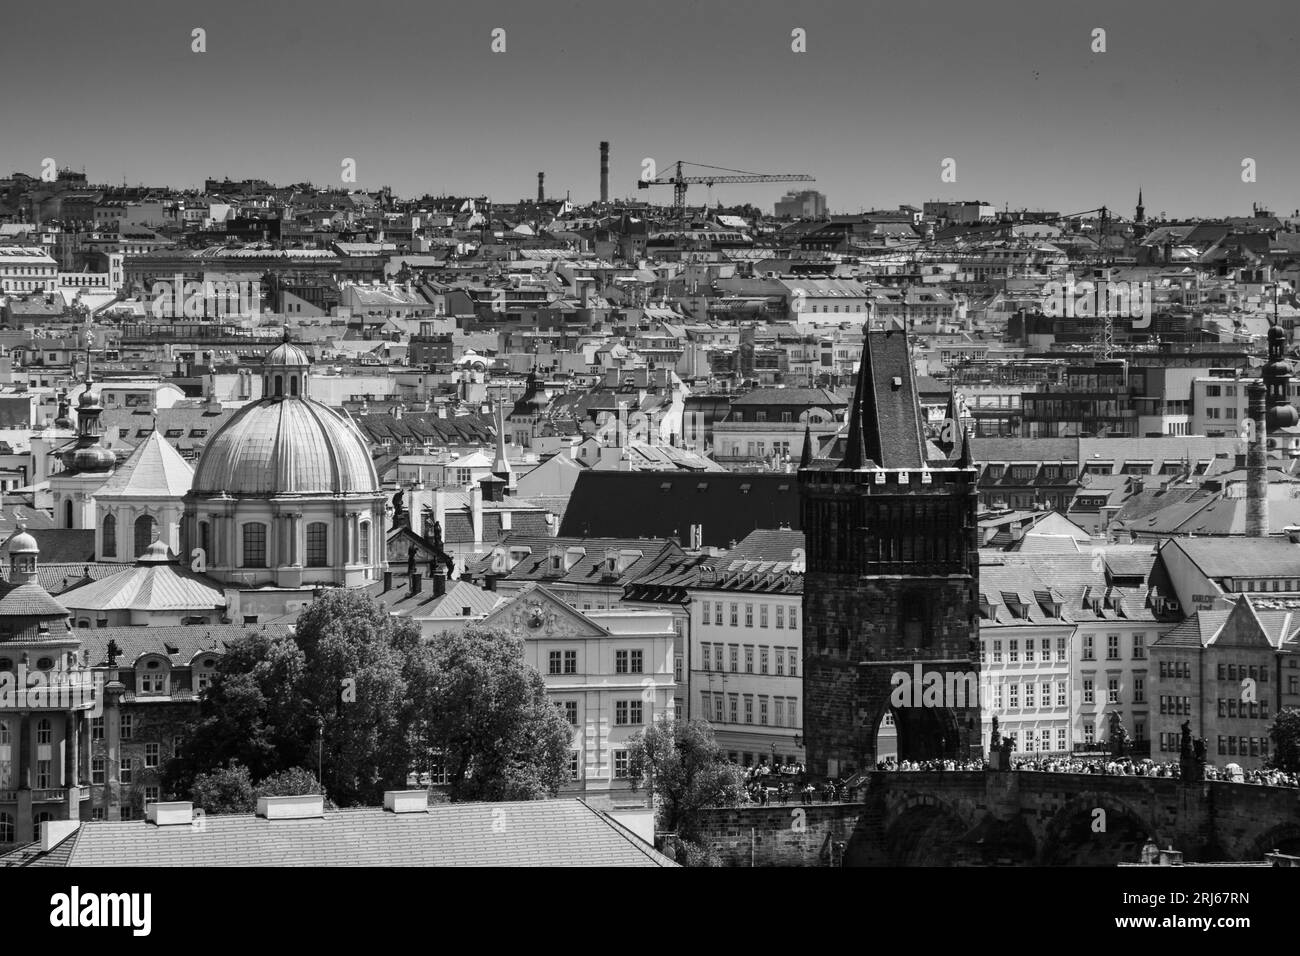 An Aerial view of Prague cityscape with iconic architecture and rooftops Stock Photo